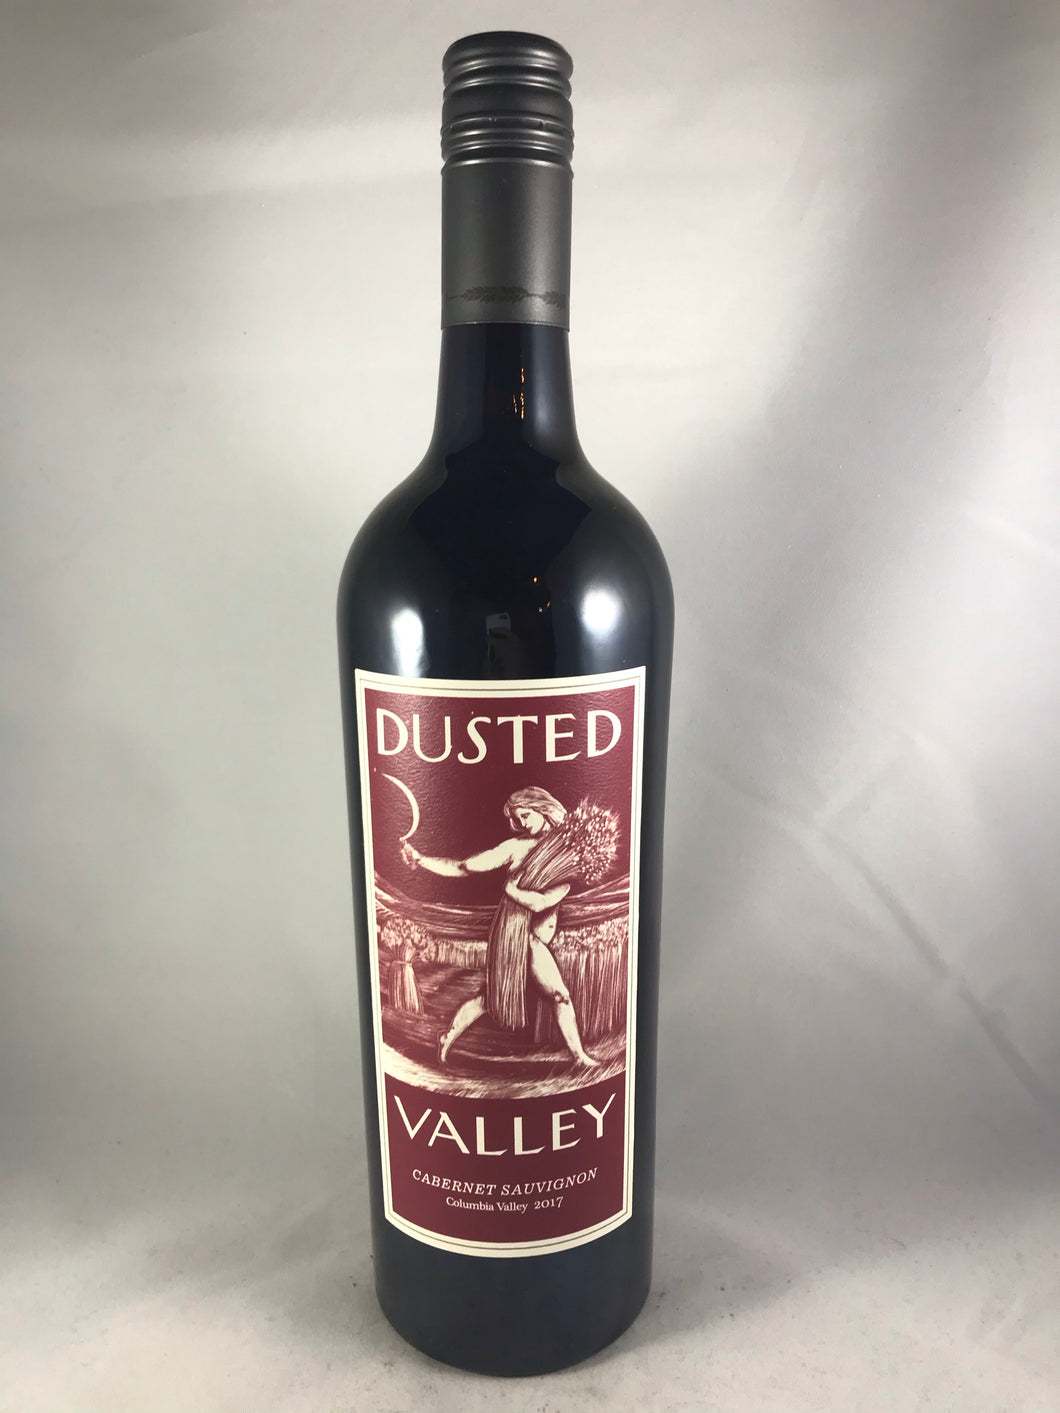 Dusted Valley Cabernet Sauvignon 2017, Columbia Valley